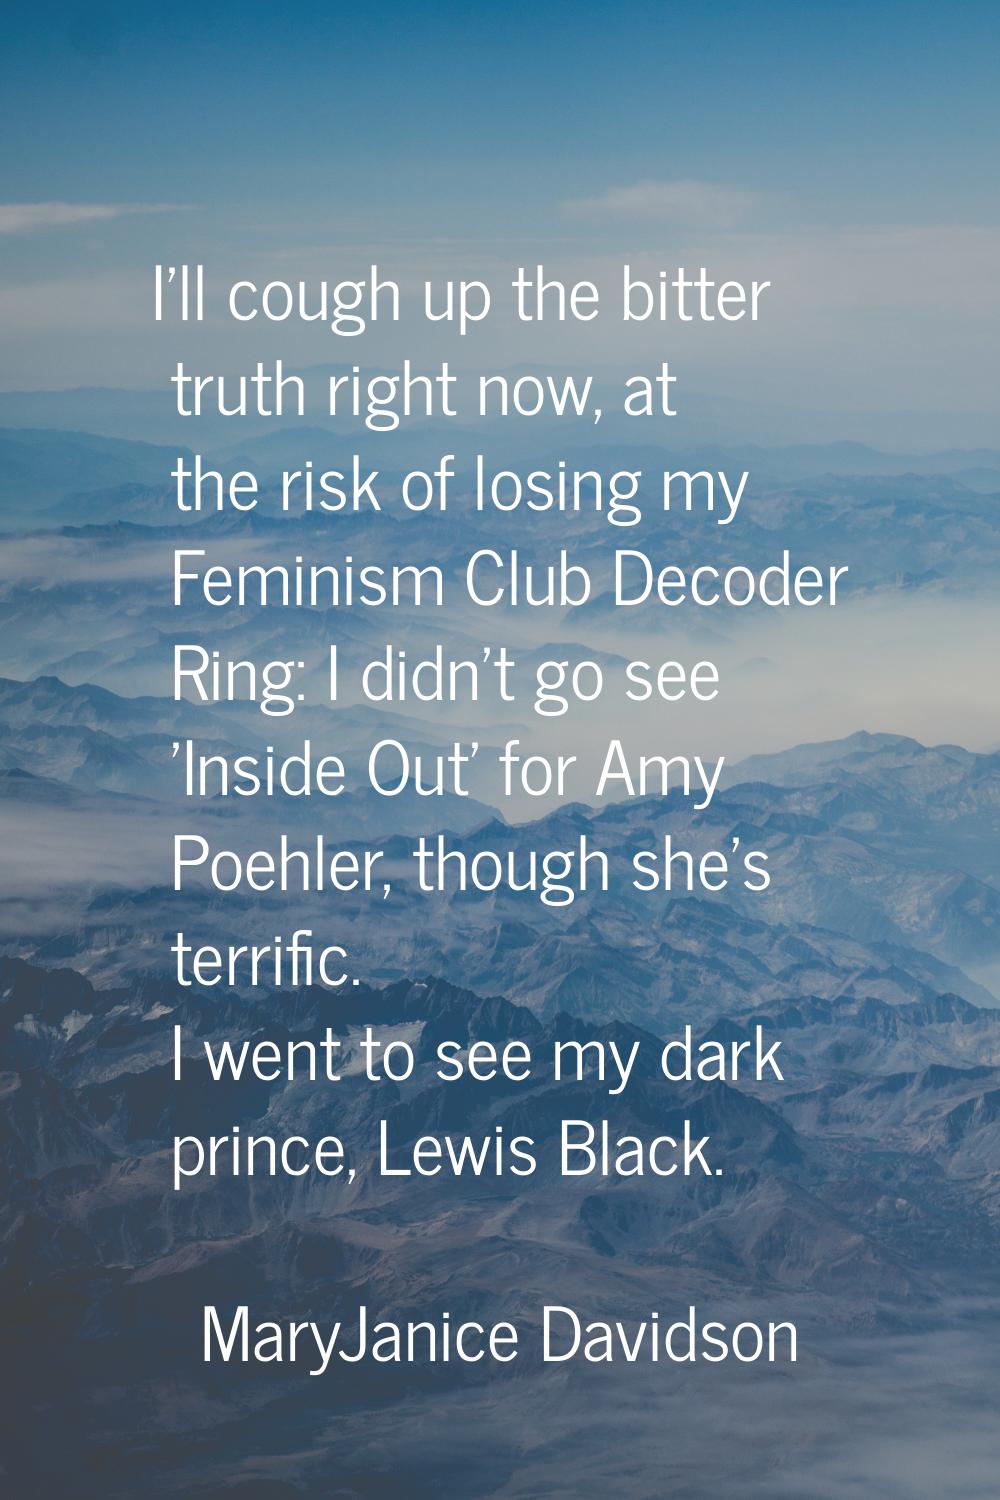 I'll cough up the bitter truth right now, at the risk of losing my Feminism Club Decoder Ring: I di